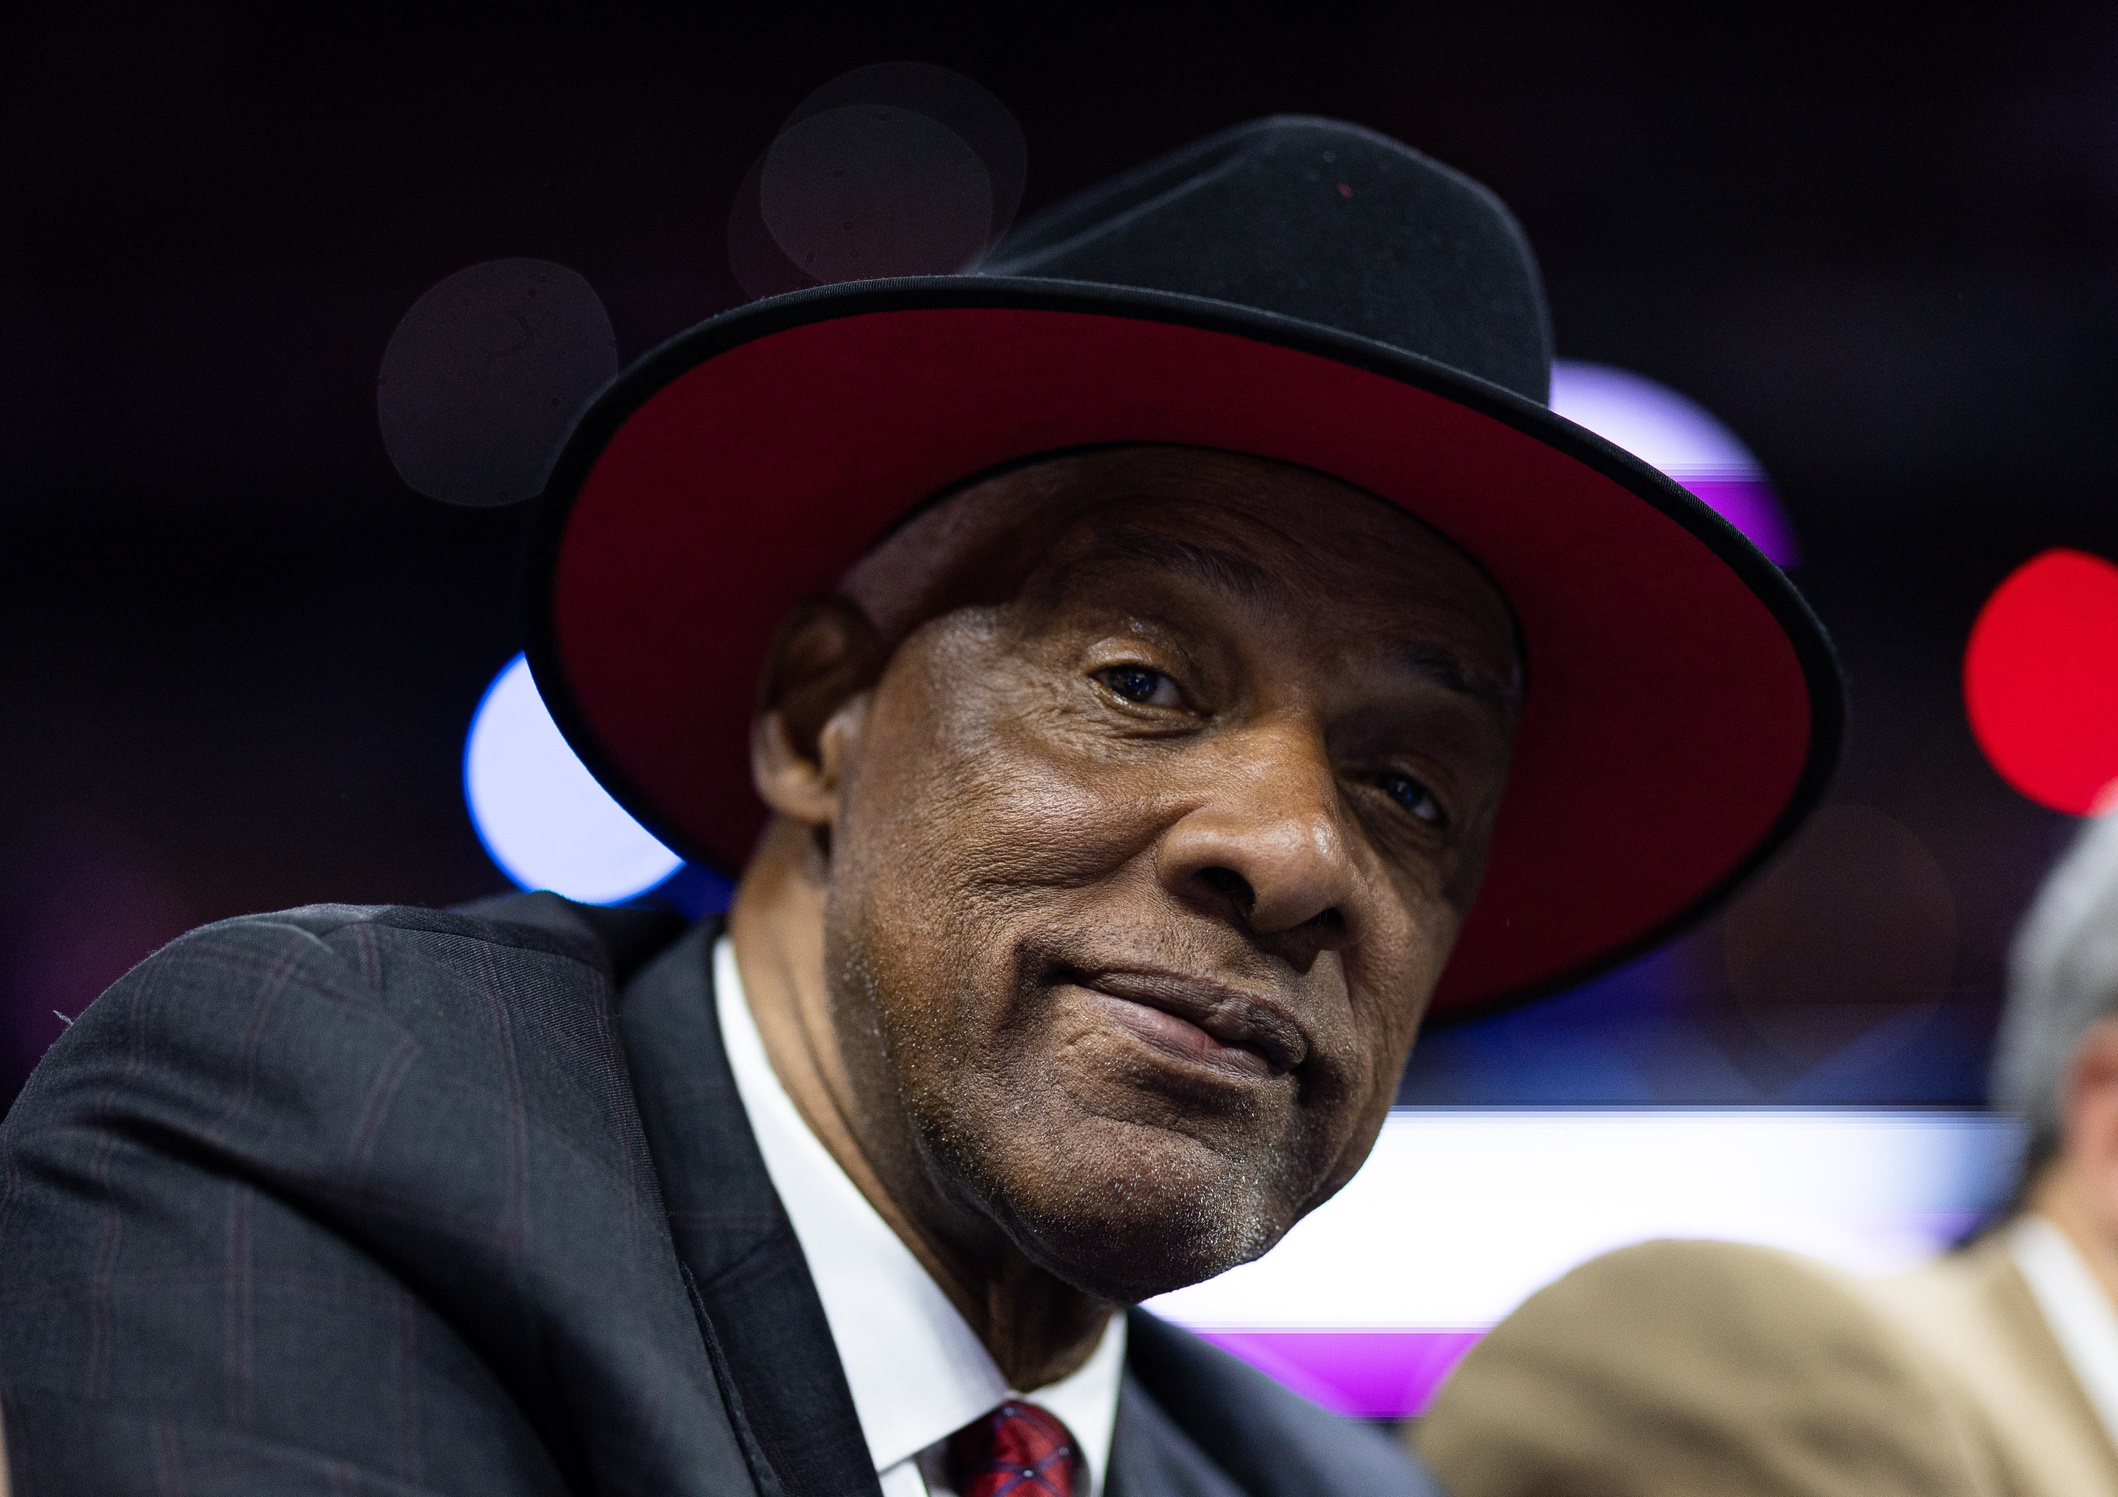 Apr 17, 2023; Philadelphia, Pennsylvania, USA; NBA hall of fame member and former Philadelphia 76ers Julius Erving looks on during the fourth quarter in game two of the 2023 NBA playoffs against the Brooklyn Nets at Wells Fargo Center. Mandatory Credit: Bill Streicher-USA TODAY Sports